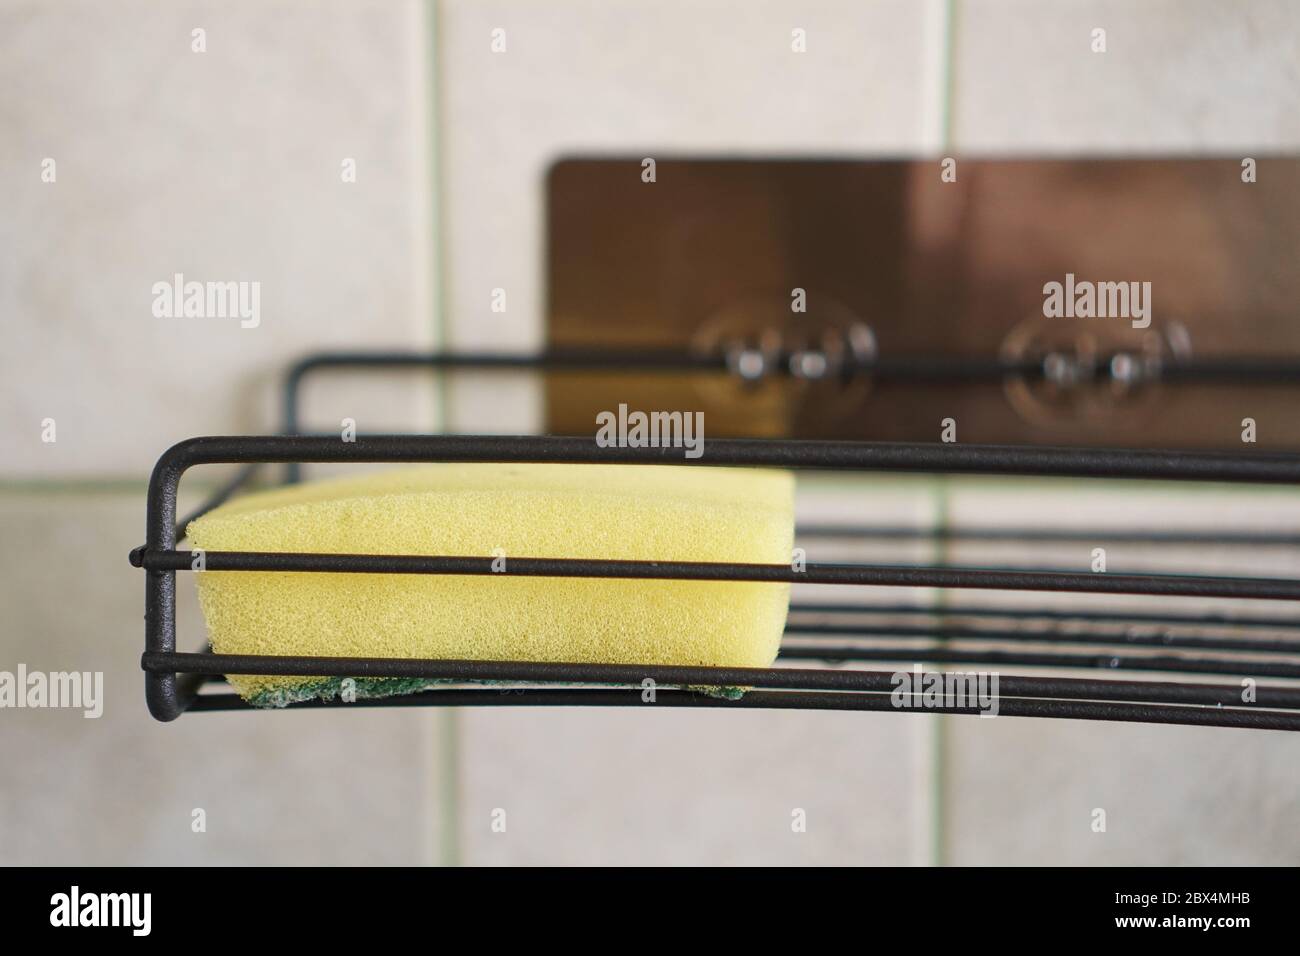 Sponge for washing dishes on metal shelf in kitchen. Concept of cleaning. Close-up interior. No people. Stock Photo